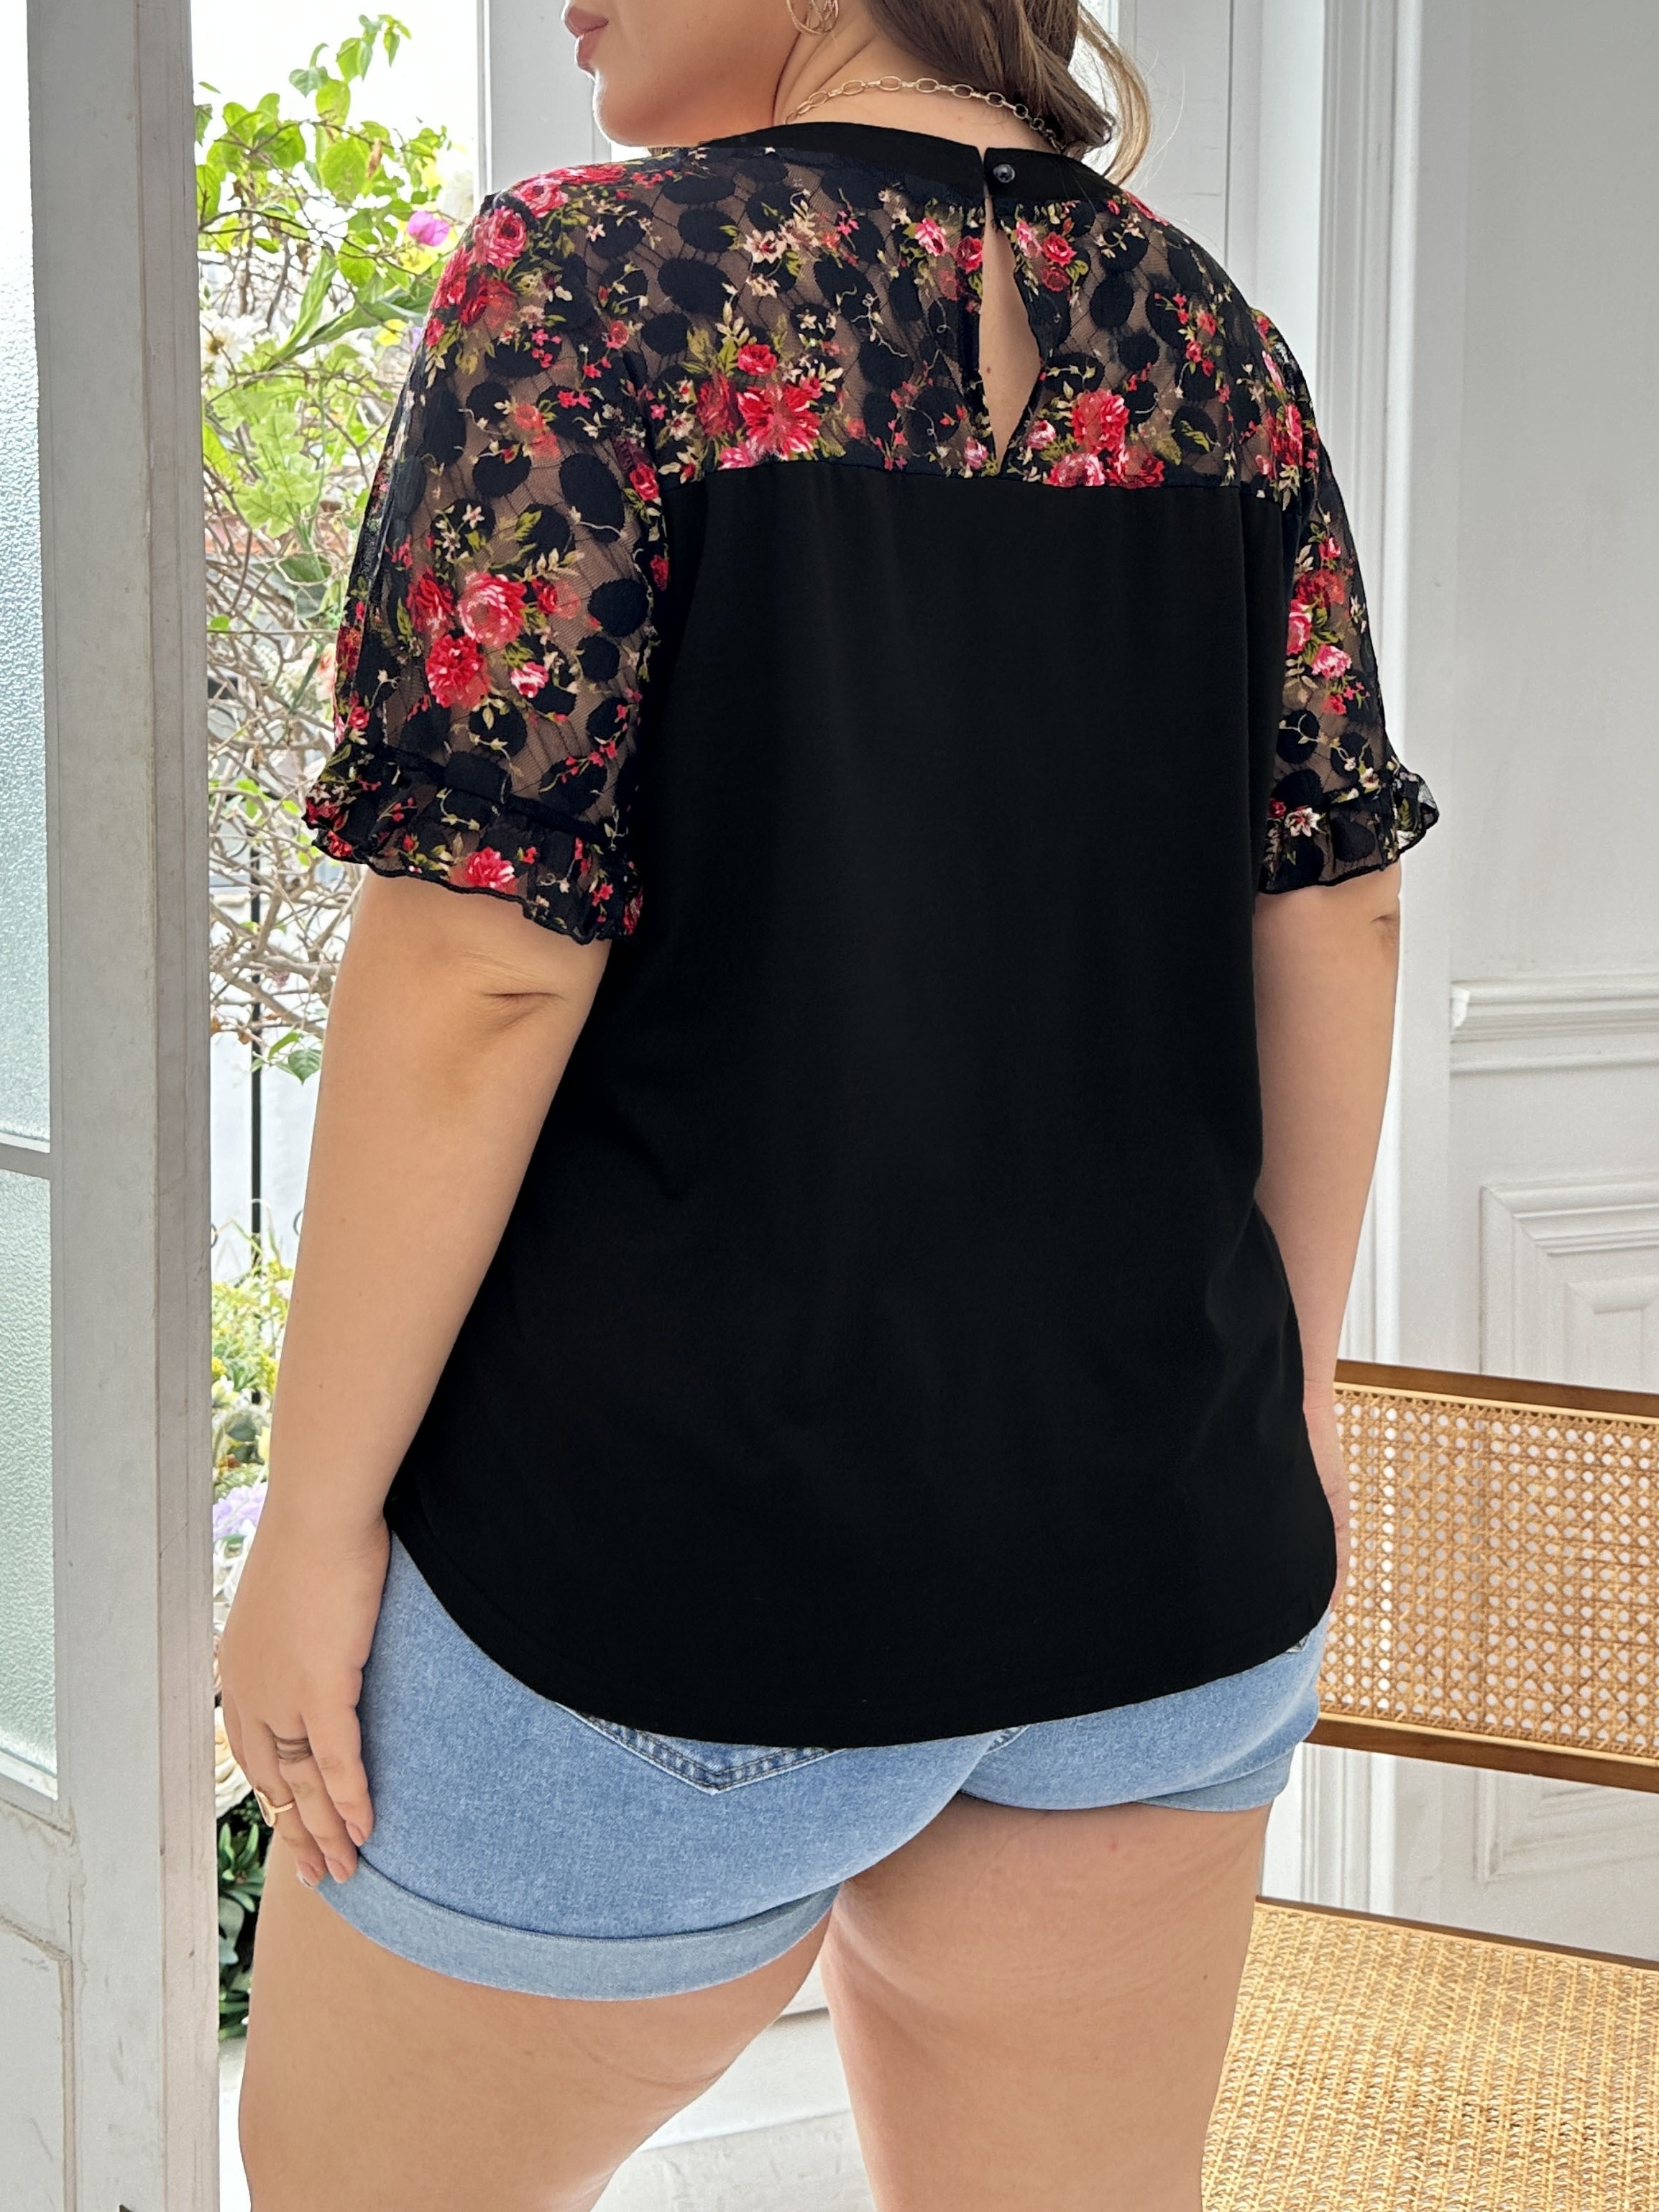 Womens Plus Size Tops - 1x. Black with Beige floral Design. Short Sleeve 